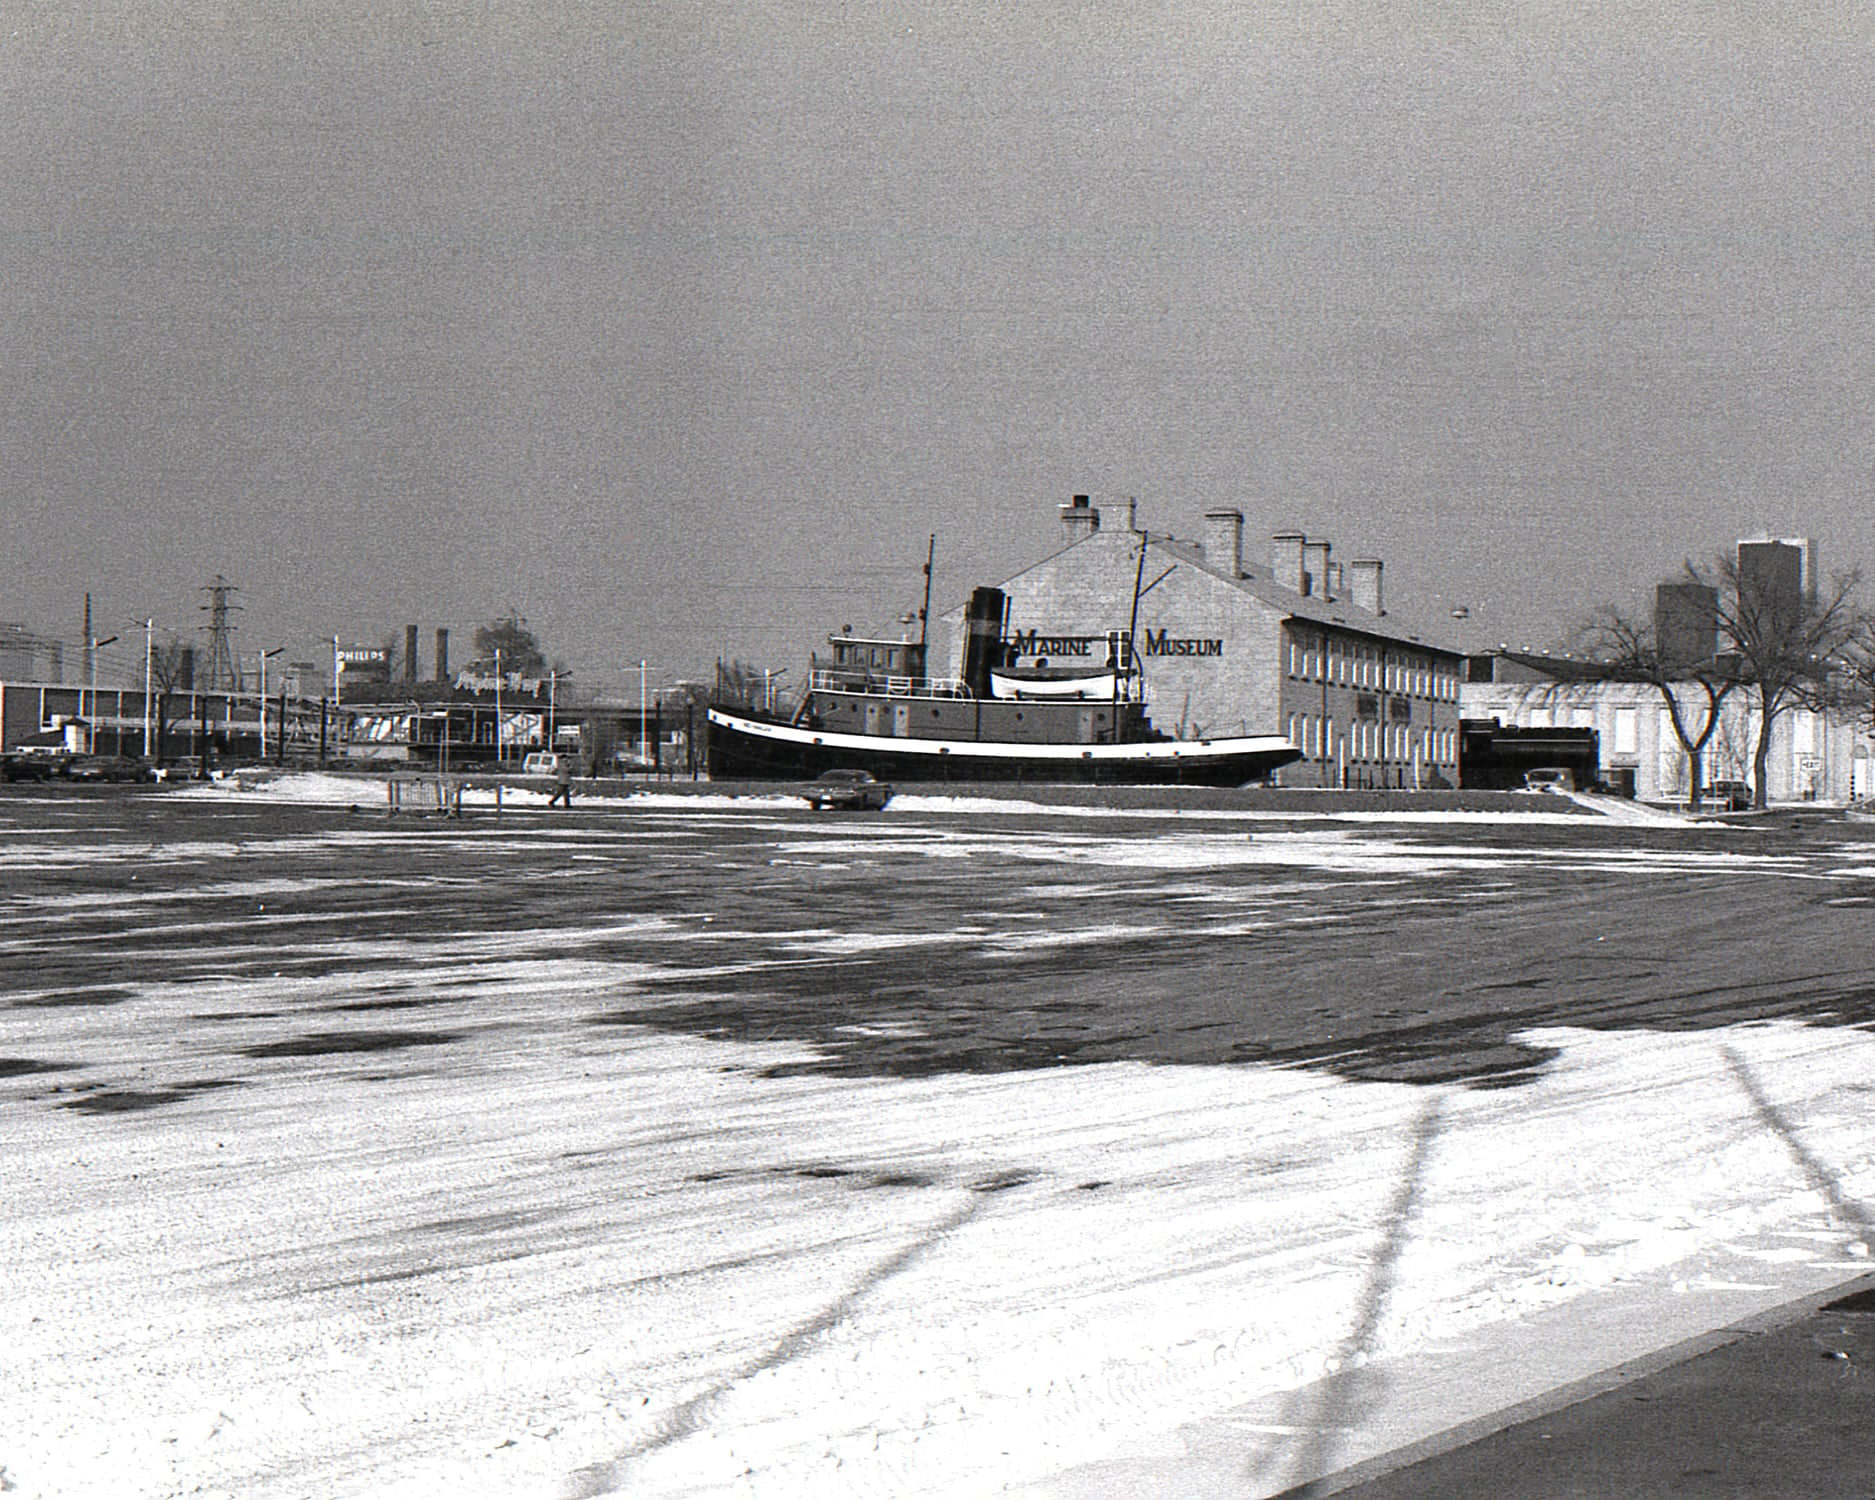 Looking north east to the Marine Museum. CNE grounds in Winter, 1970s